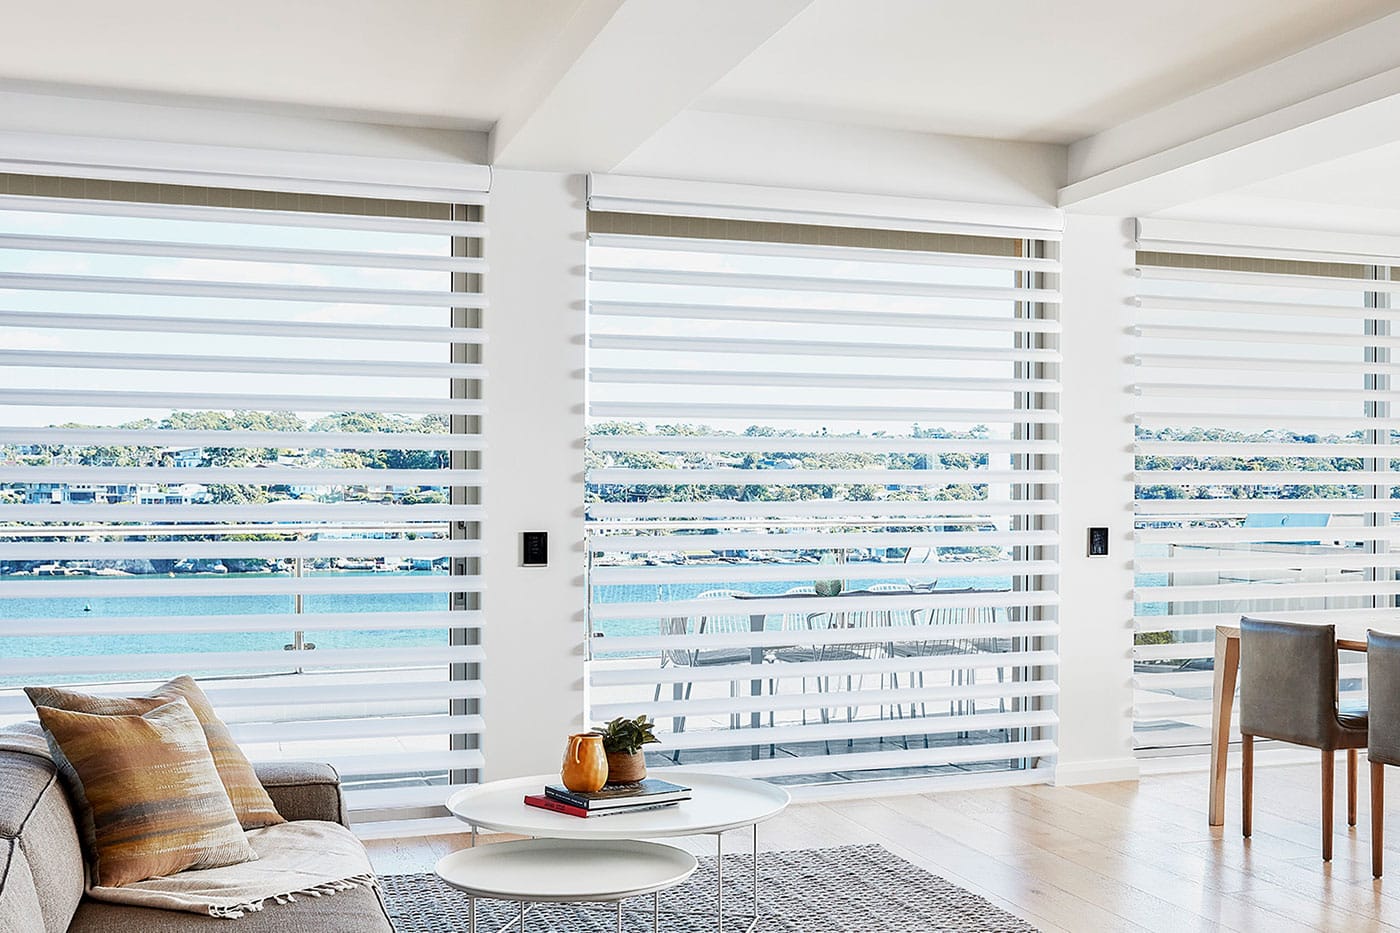 Pirouette shadings delivering the appearance of floating fabric vanes in a brightly lit living room, with sea view and yacht in the background.